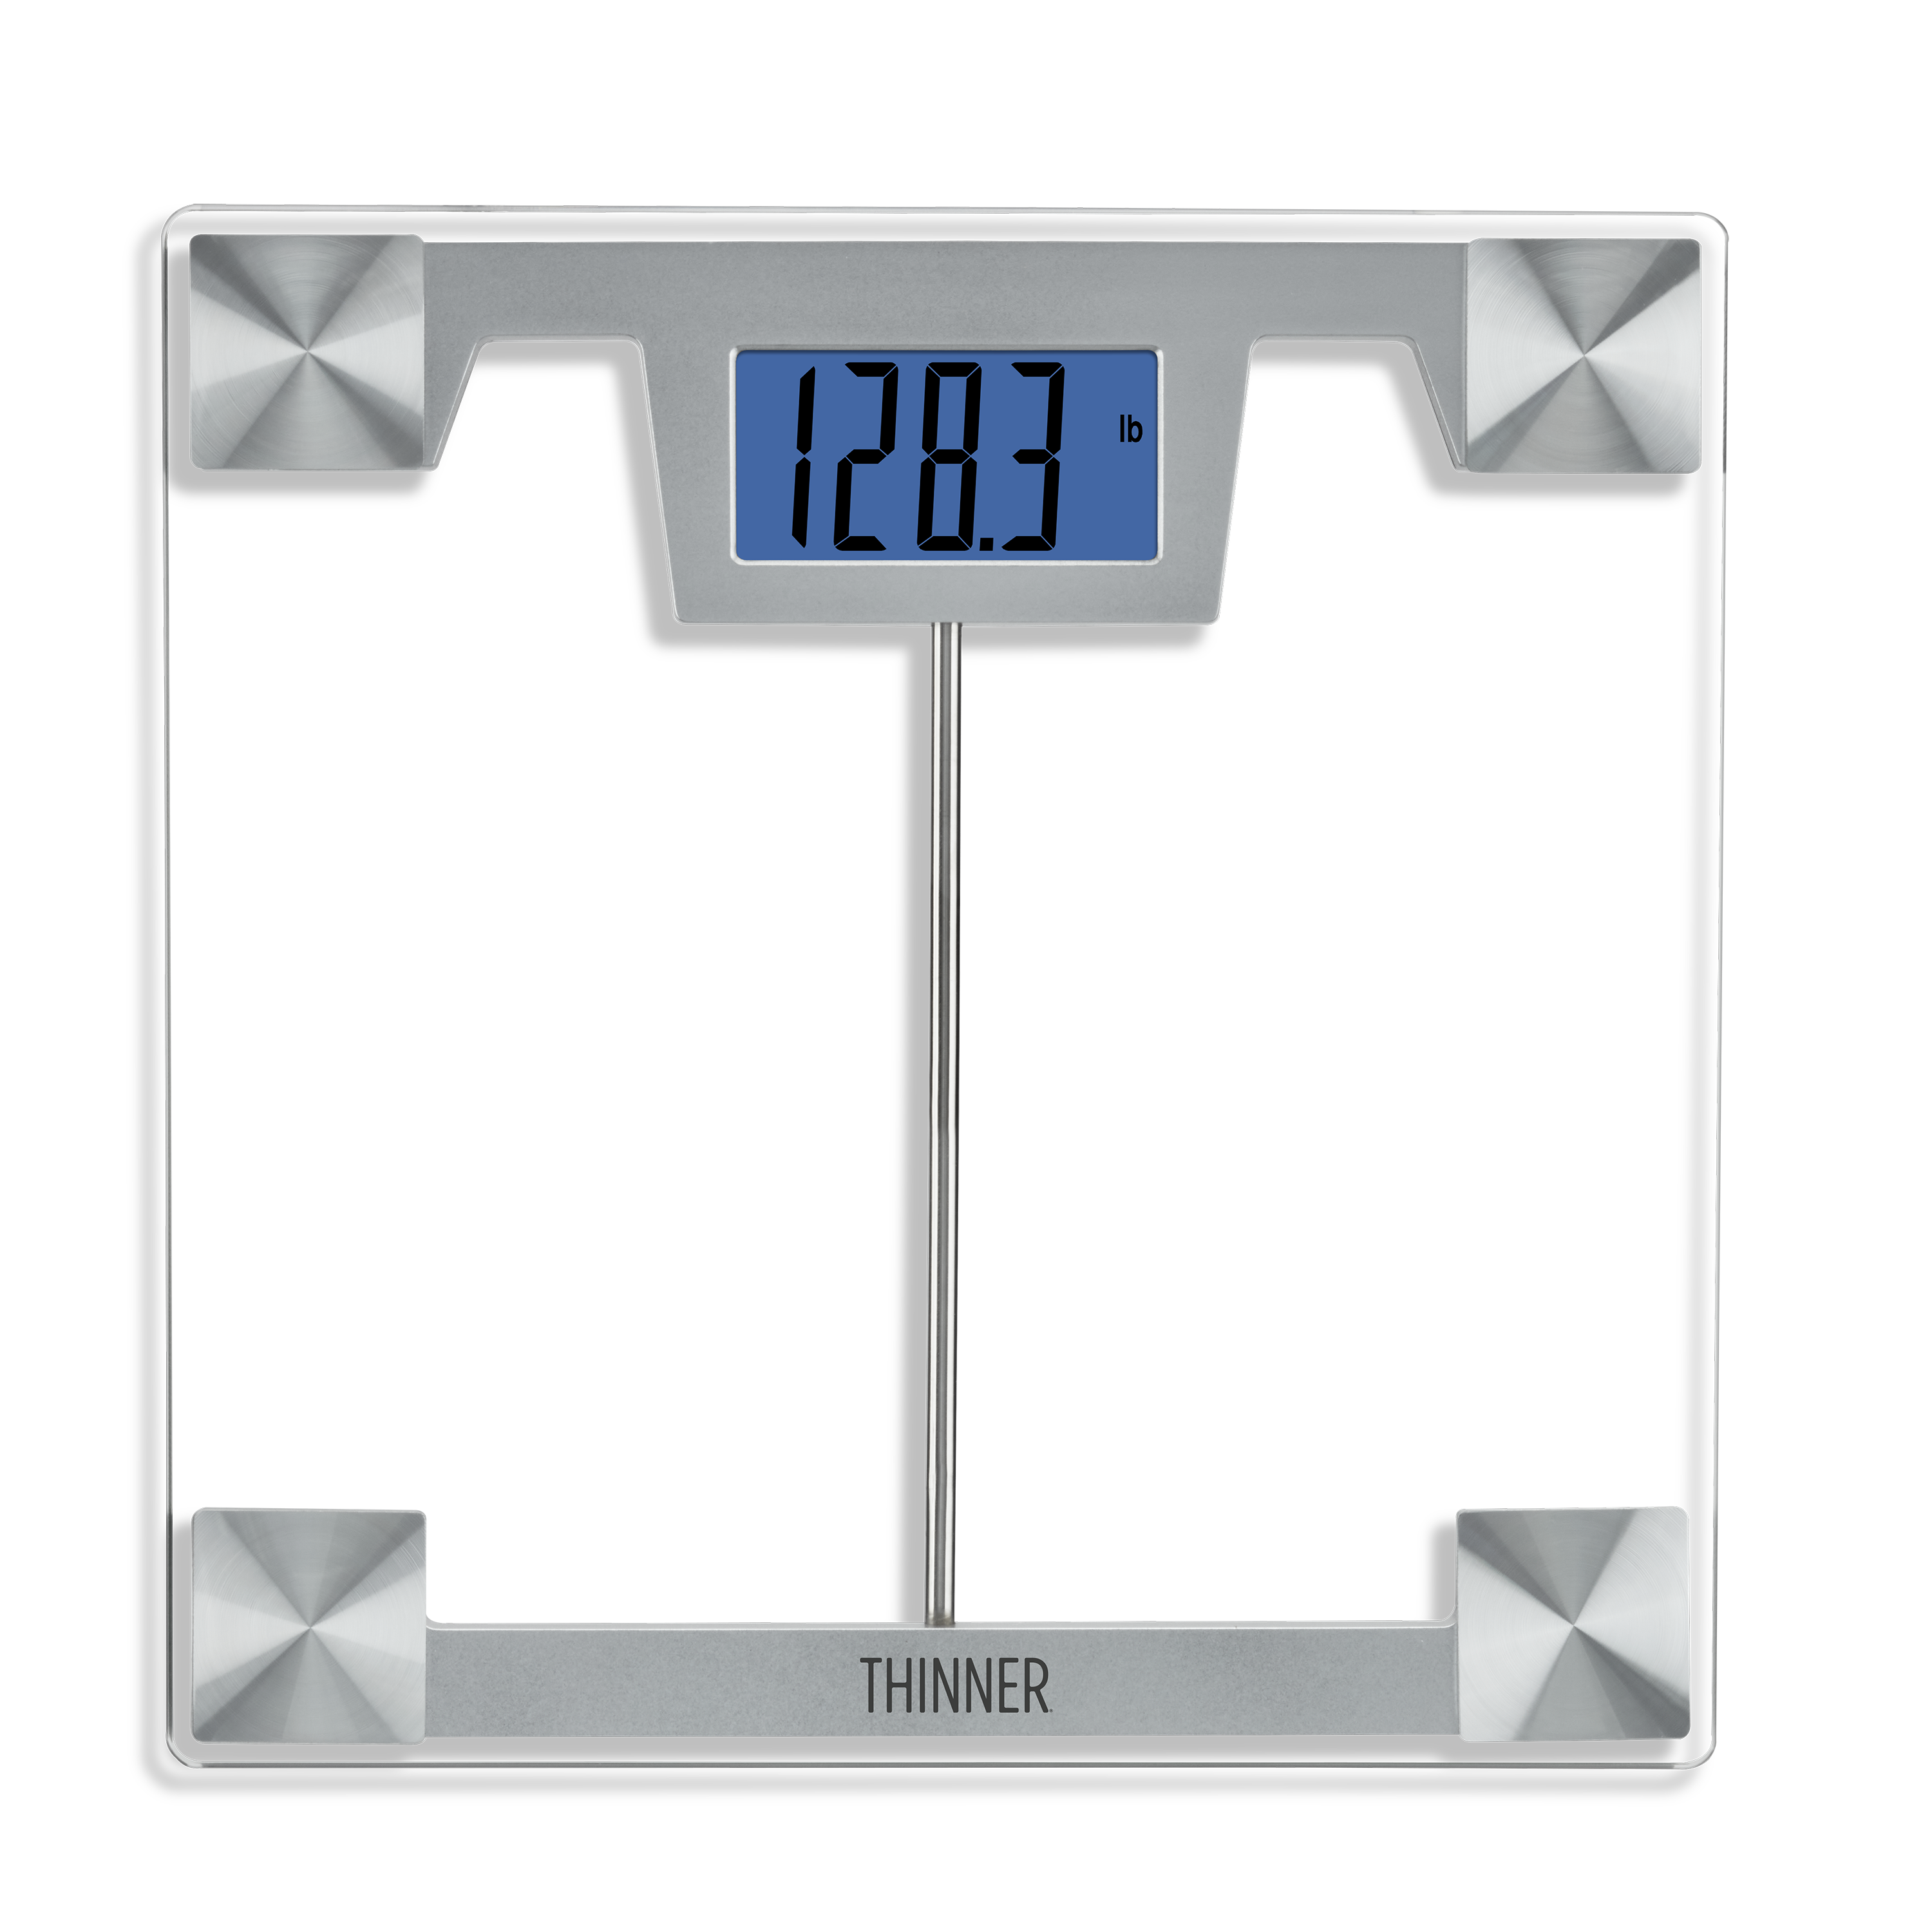 Digital Glass Weight Scale